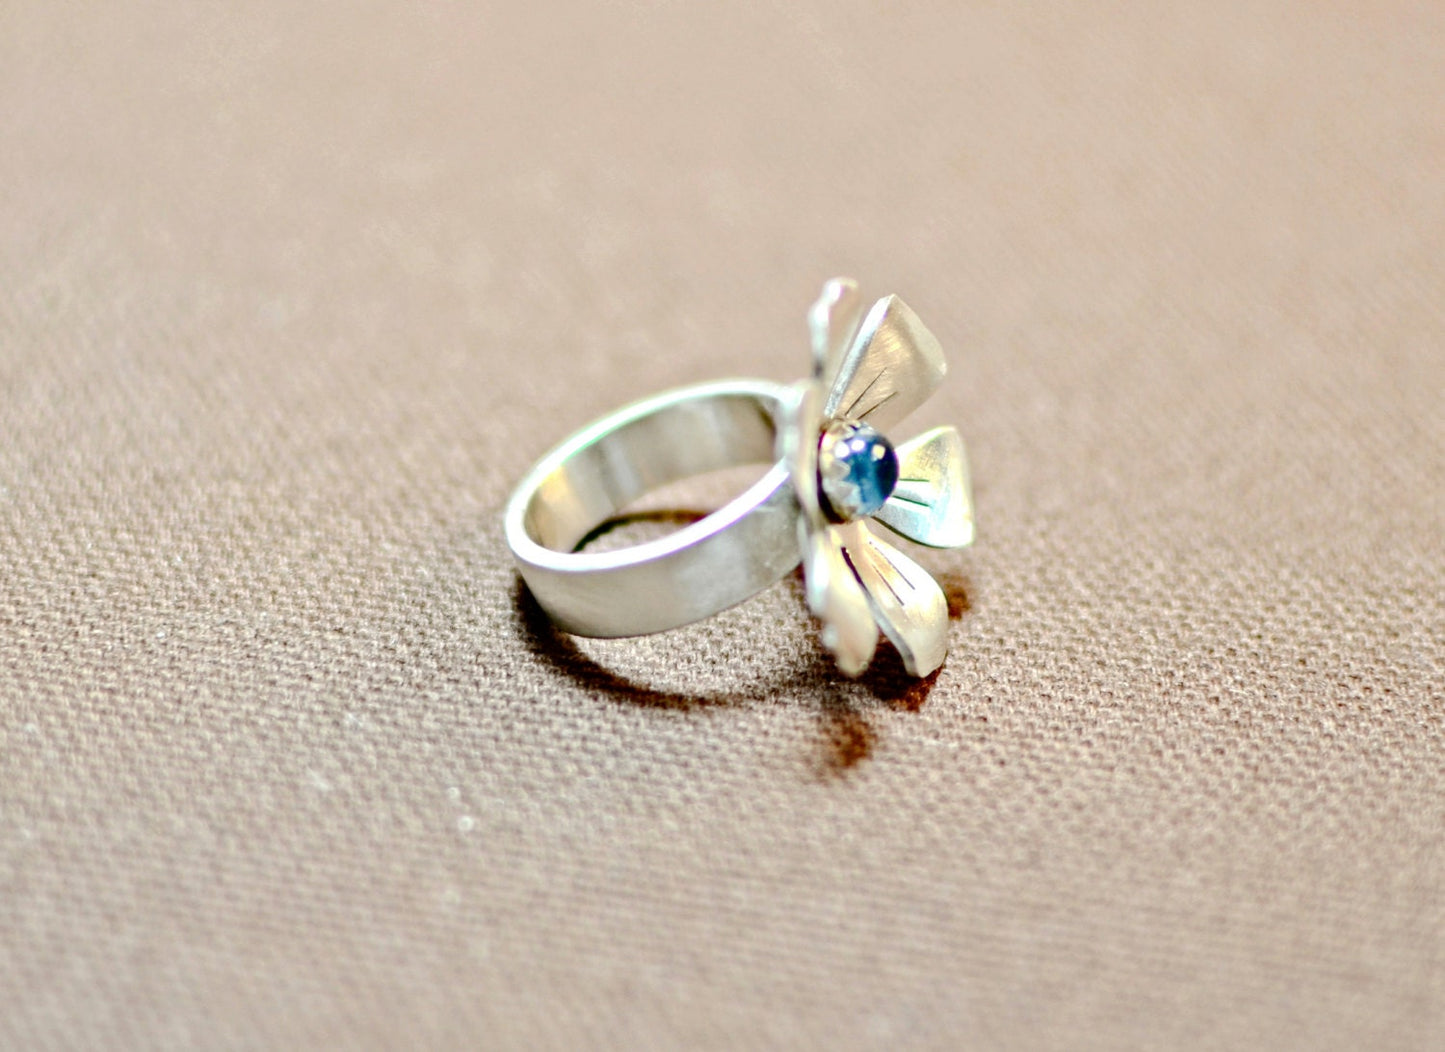 Flower shaped sterling silver ring with blue topaz